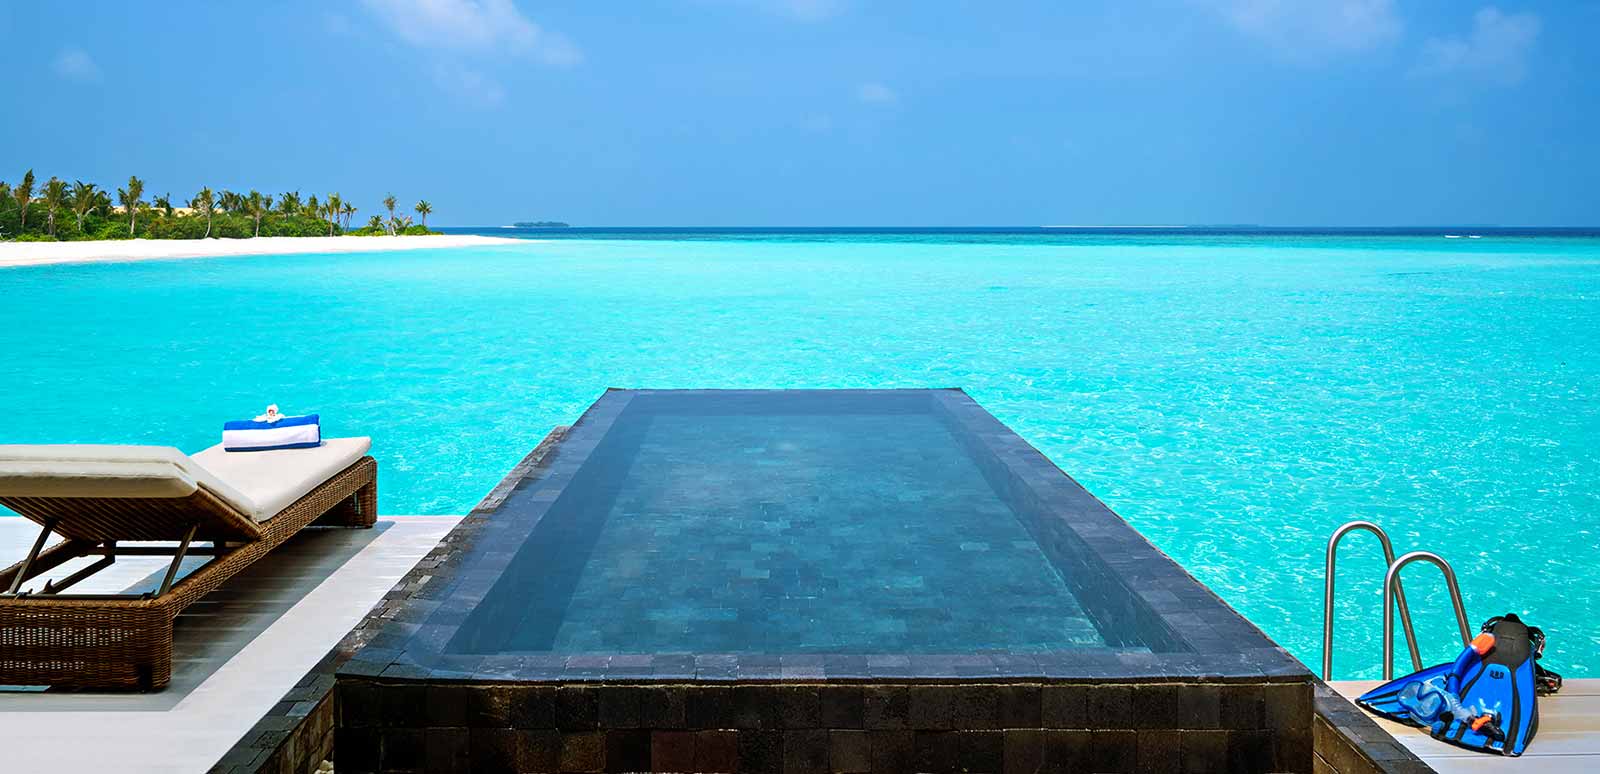 Travel to Maldives and other exotic destinations - Arenatours